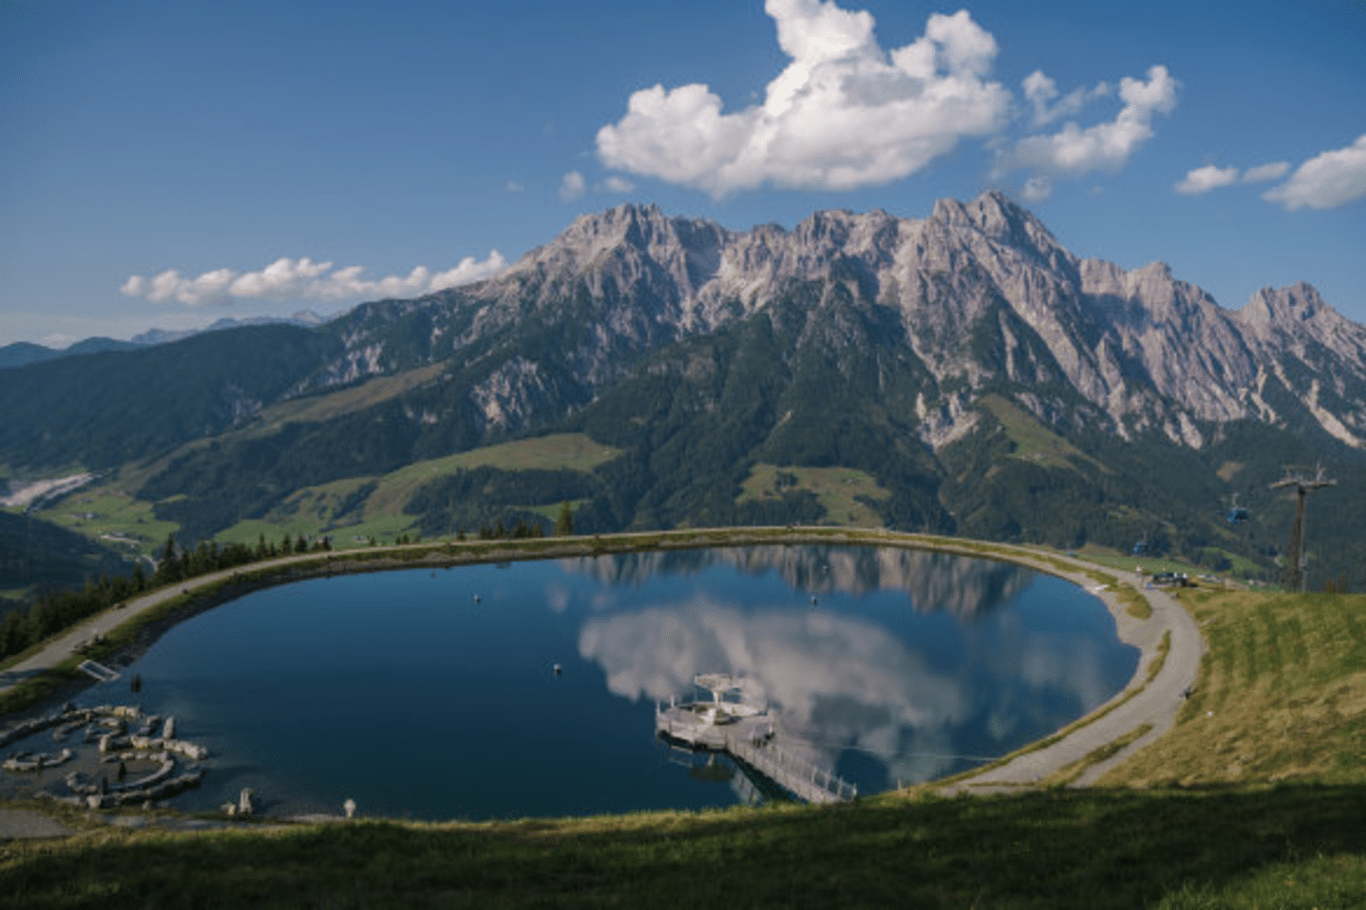 Discover the Stunning Beauty of Austria's Mountains Without the Snow